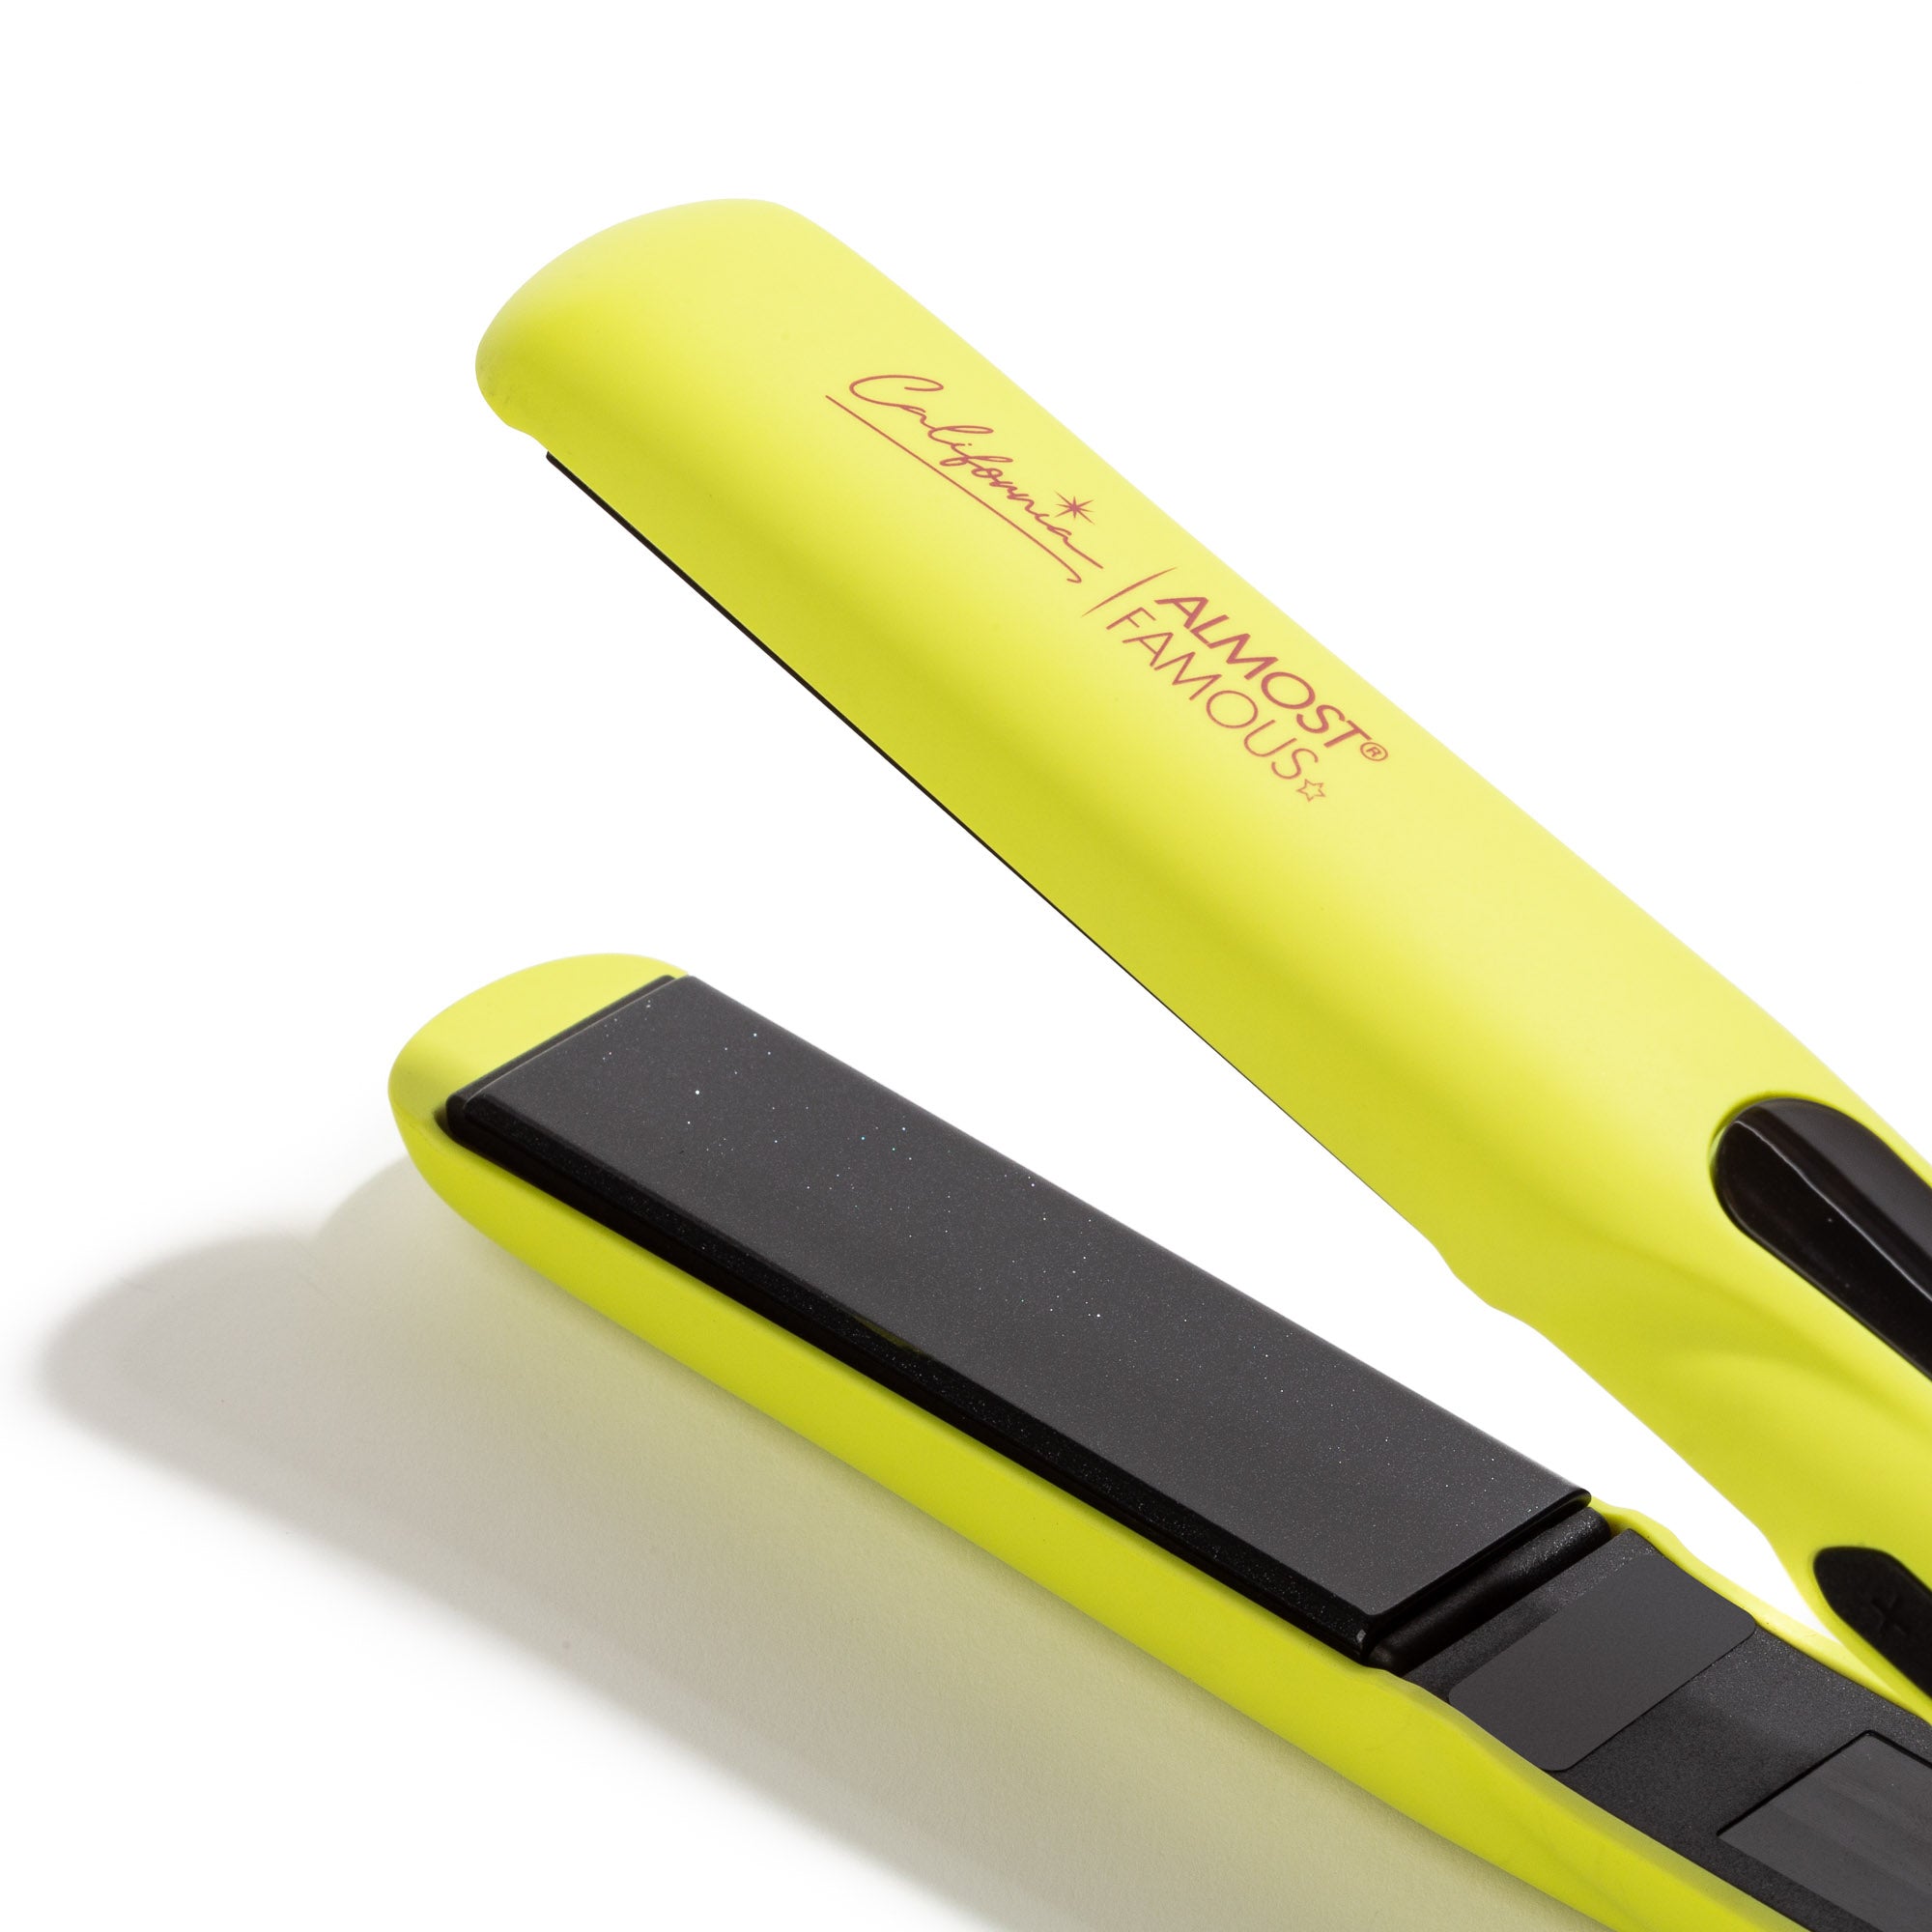 New 1.25" Digital Professional Flat Iron with Extra Wide Plates - California Collection/Yellow